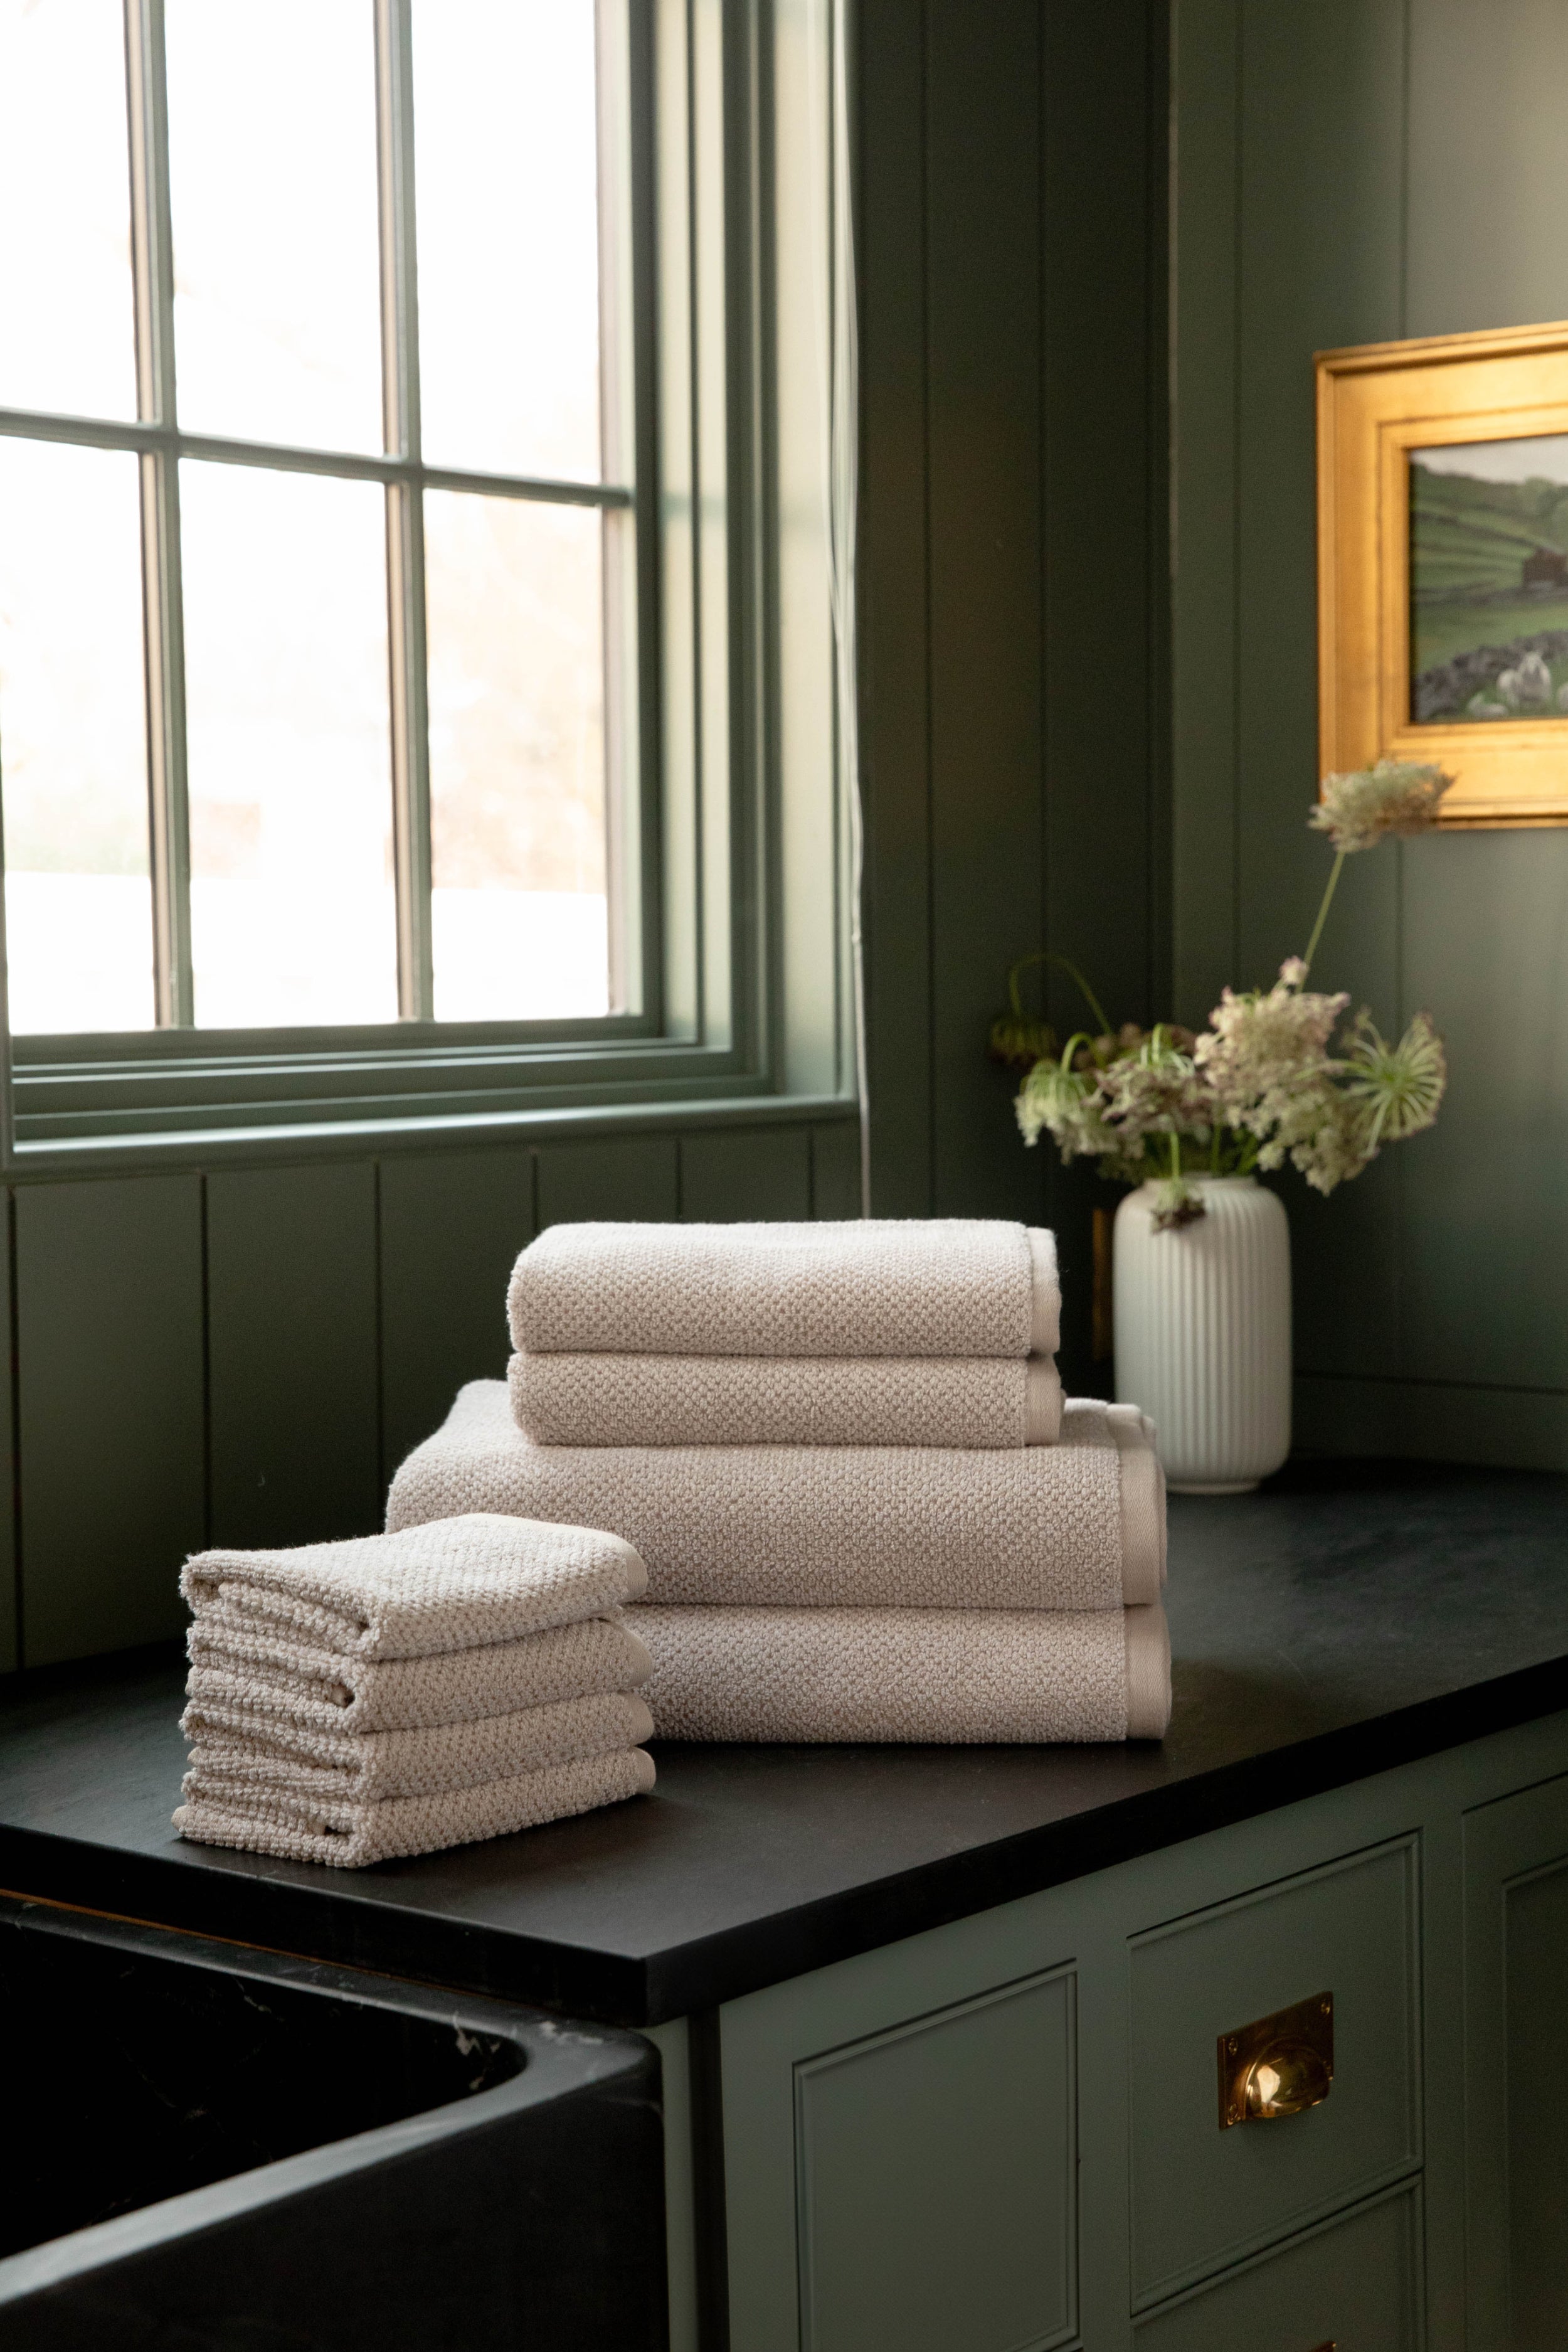 Nantucket Bath Towel Set in the color Heathered Sand. Photo of Nantucket Bath Towel Set taken with the Heathered Sand Bundle resting on a bathroom countertop. |Color: Heathered Sand